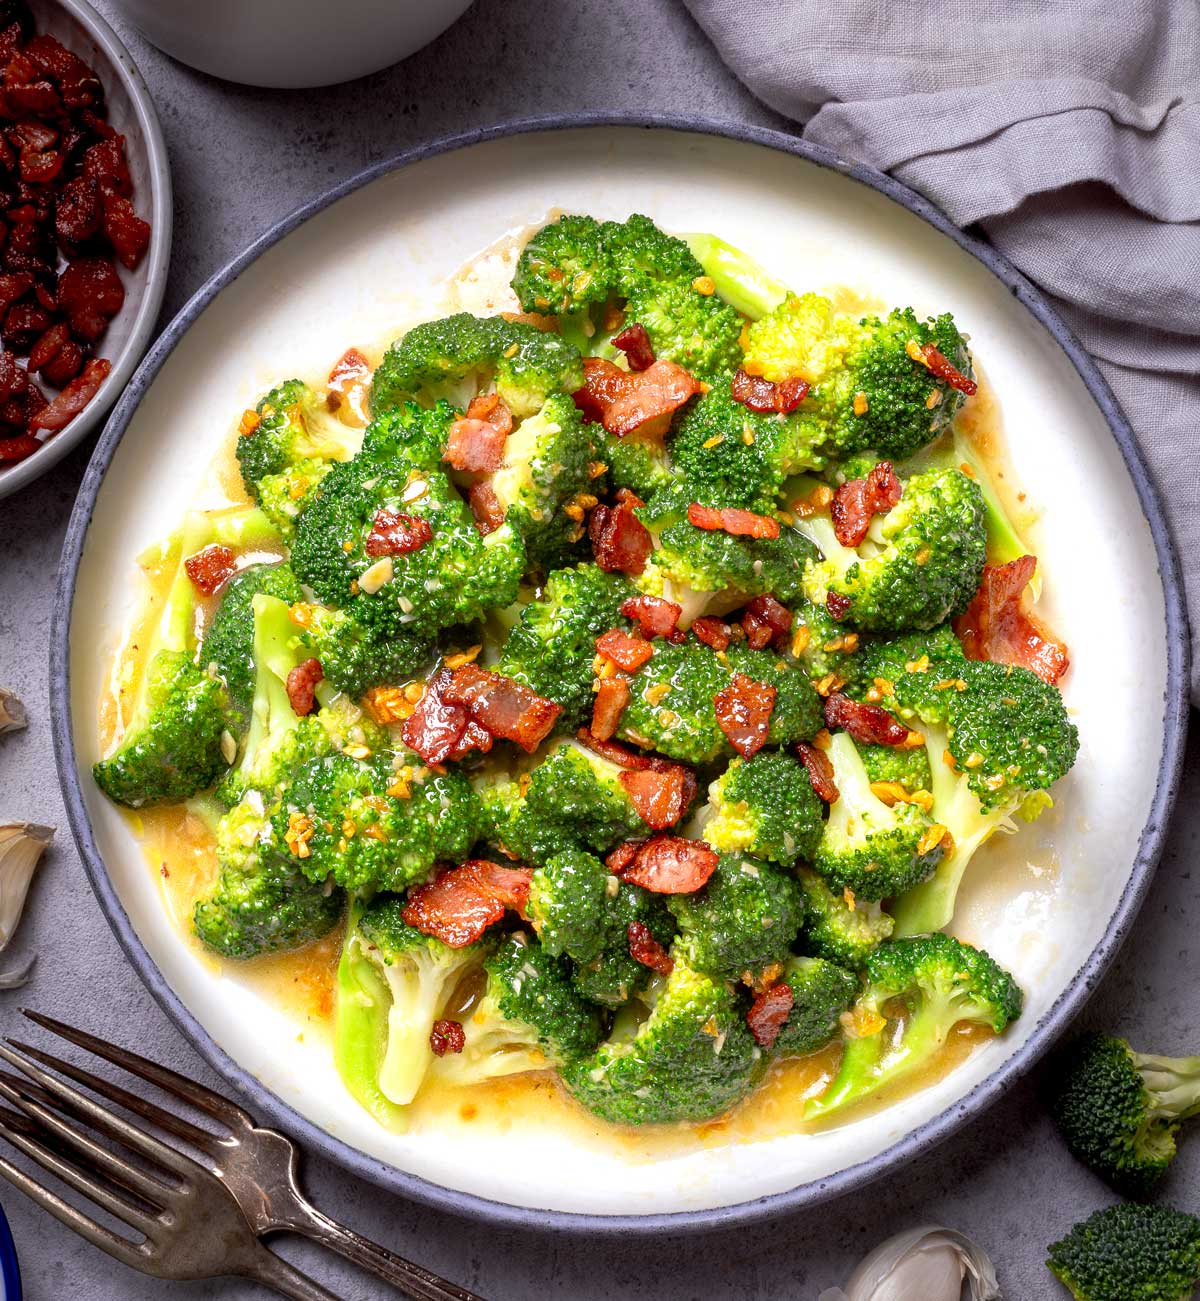 Chinese Broccoli with garlic sauce and bacon